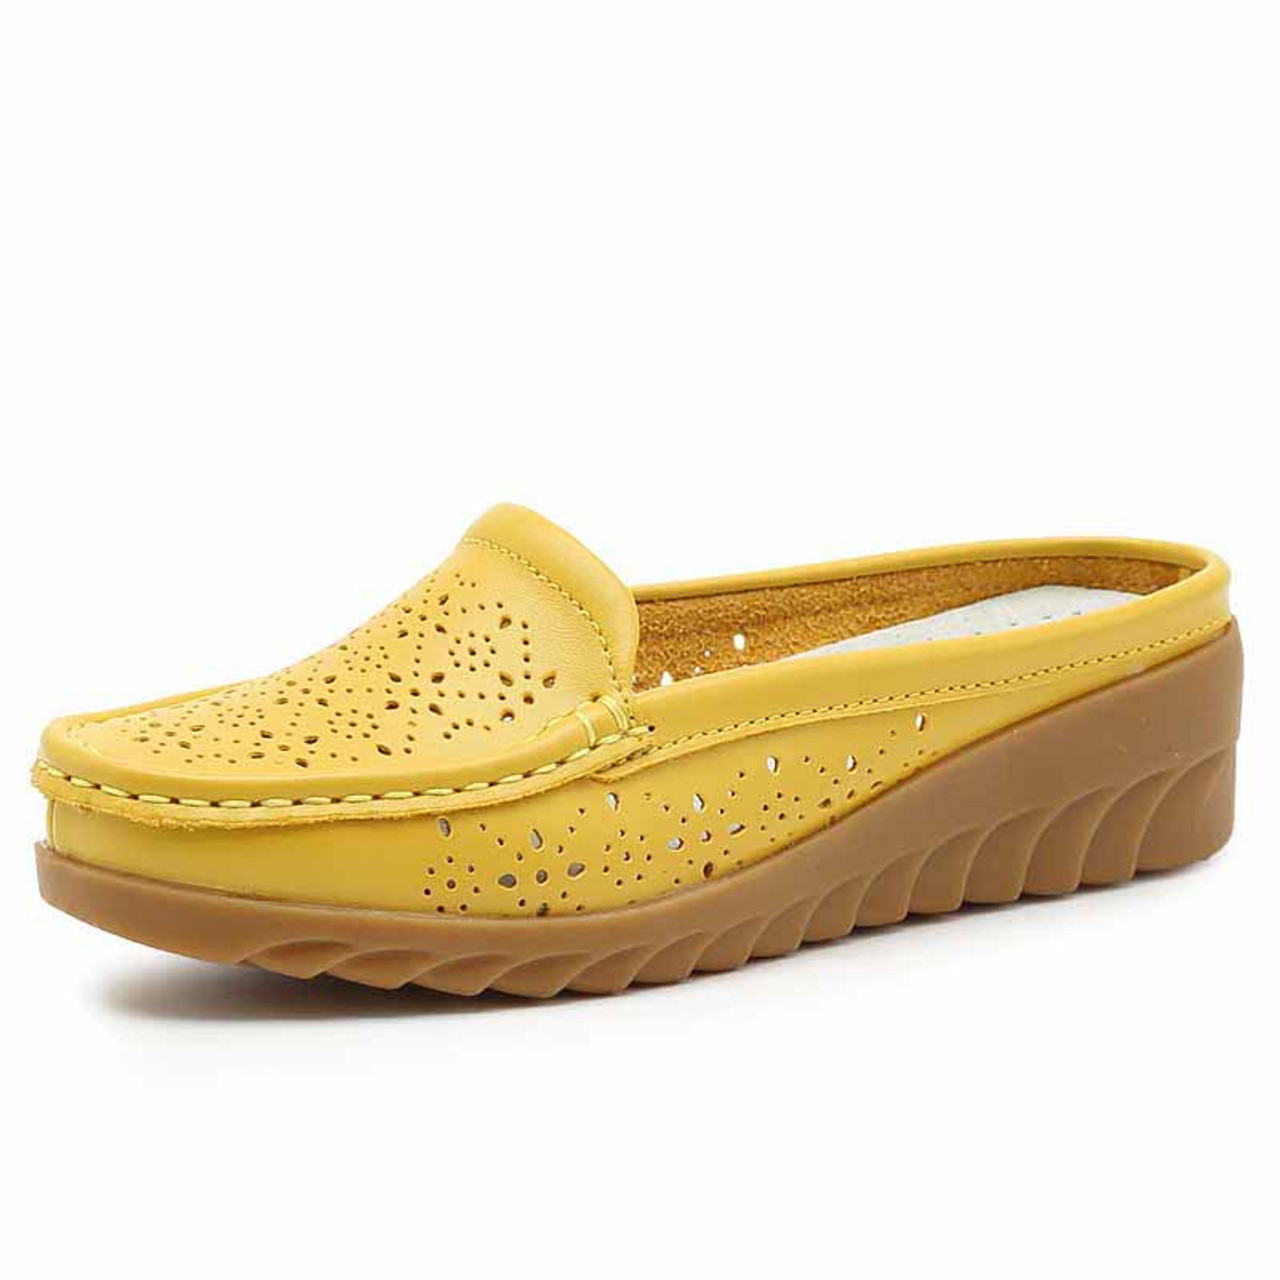 women's yellow leather loafers